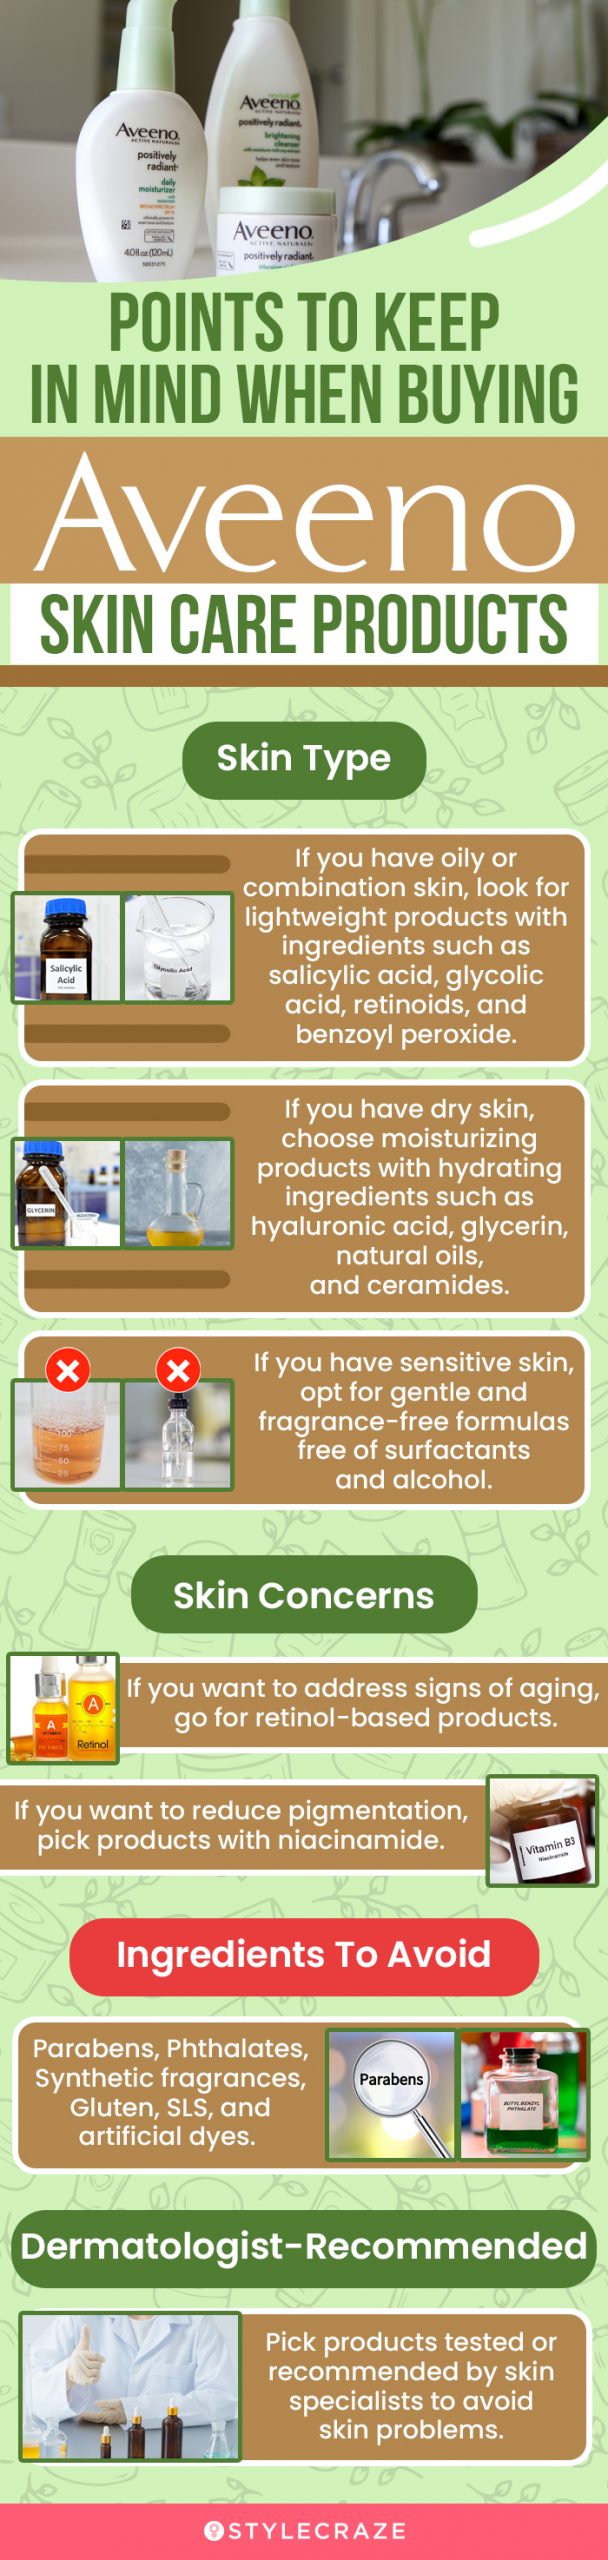 Points To Keep In Mind When Buying Aveeno Skin Care Product